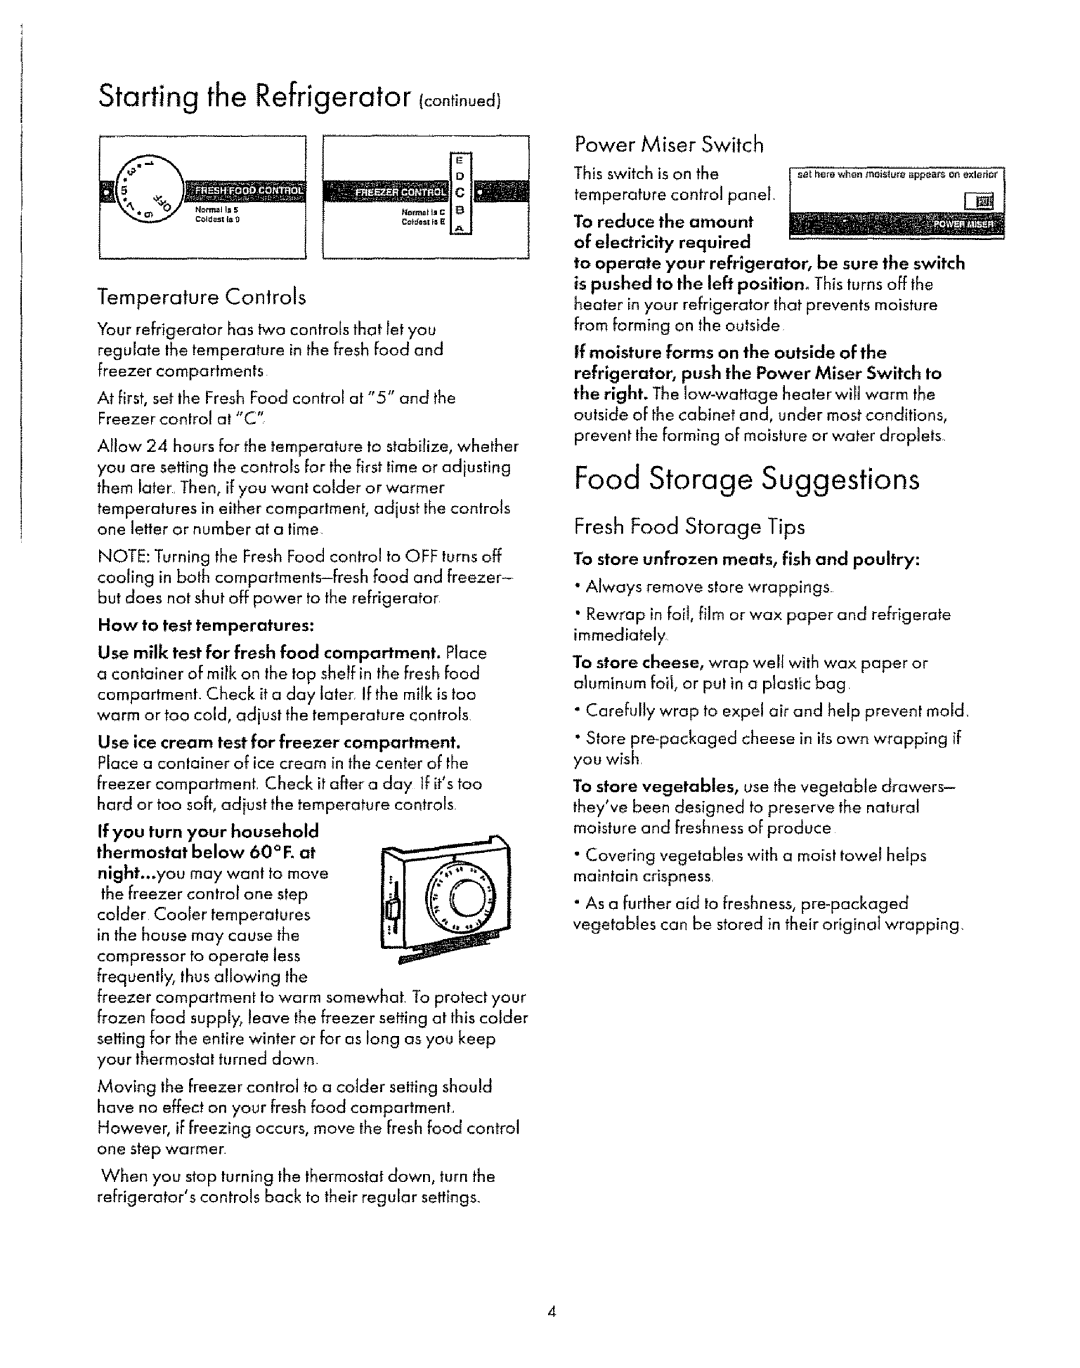 Kenmore 77878 Food Storage Suggestions, Starting the Refrigerator continued, Temperature Controls, Power Miser, Switch 